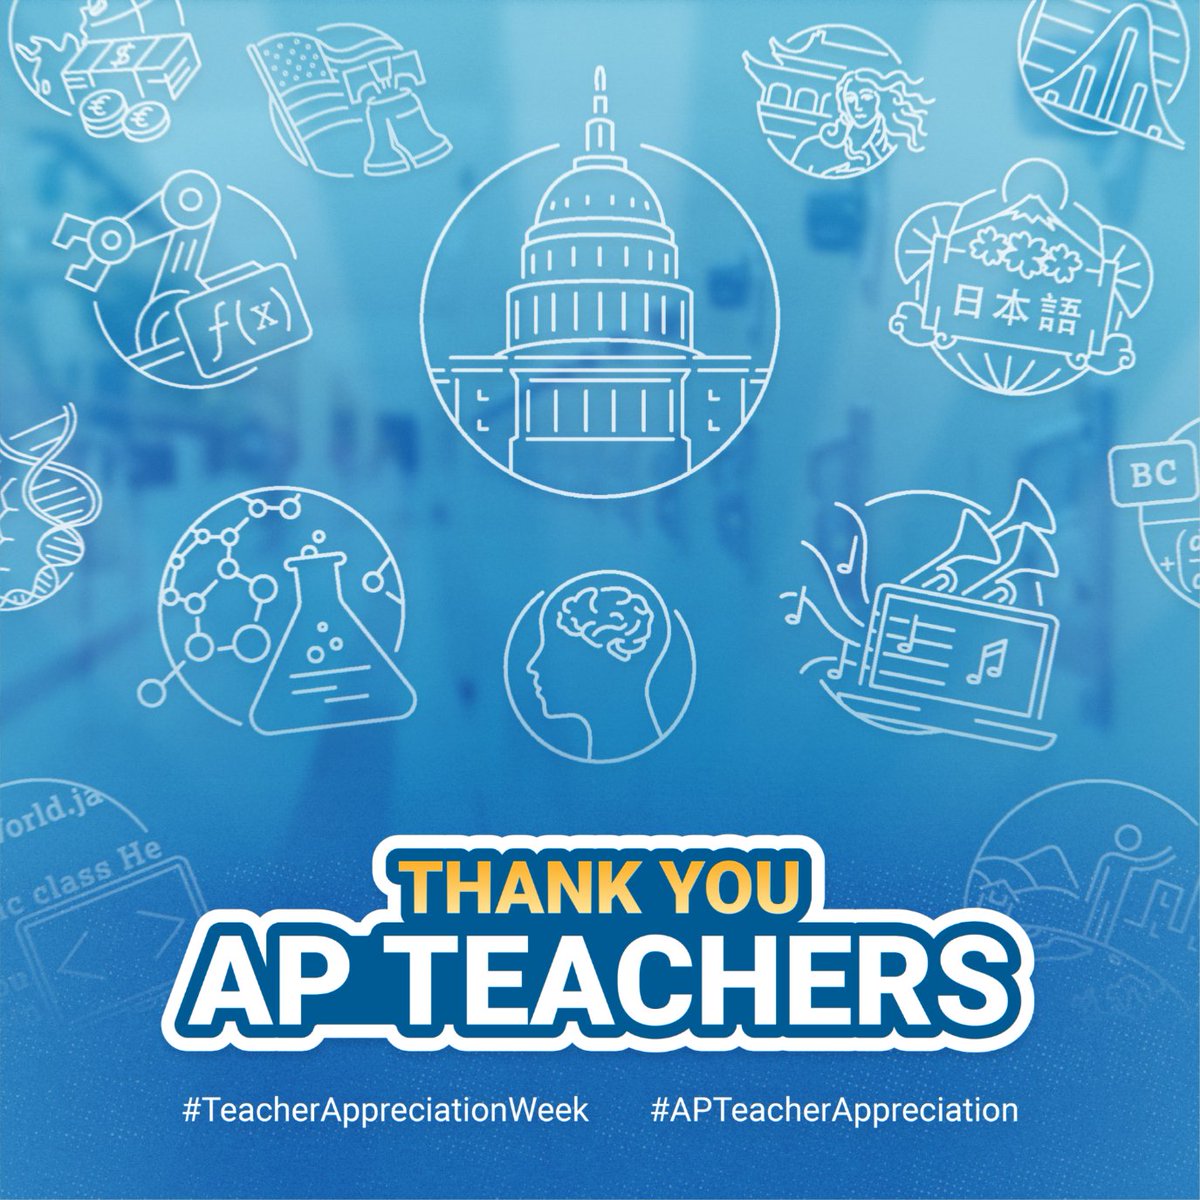 As #APExams kick off this week, we’re proud to recognize the dedicated AP teachers who equip students for success. Happy #APTeacherAppreciationWeek! #APTeacherAppreciation